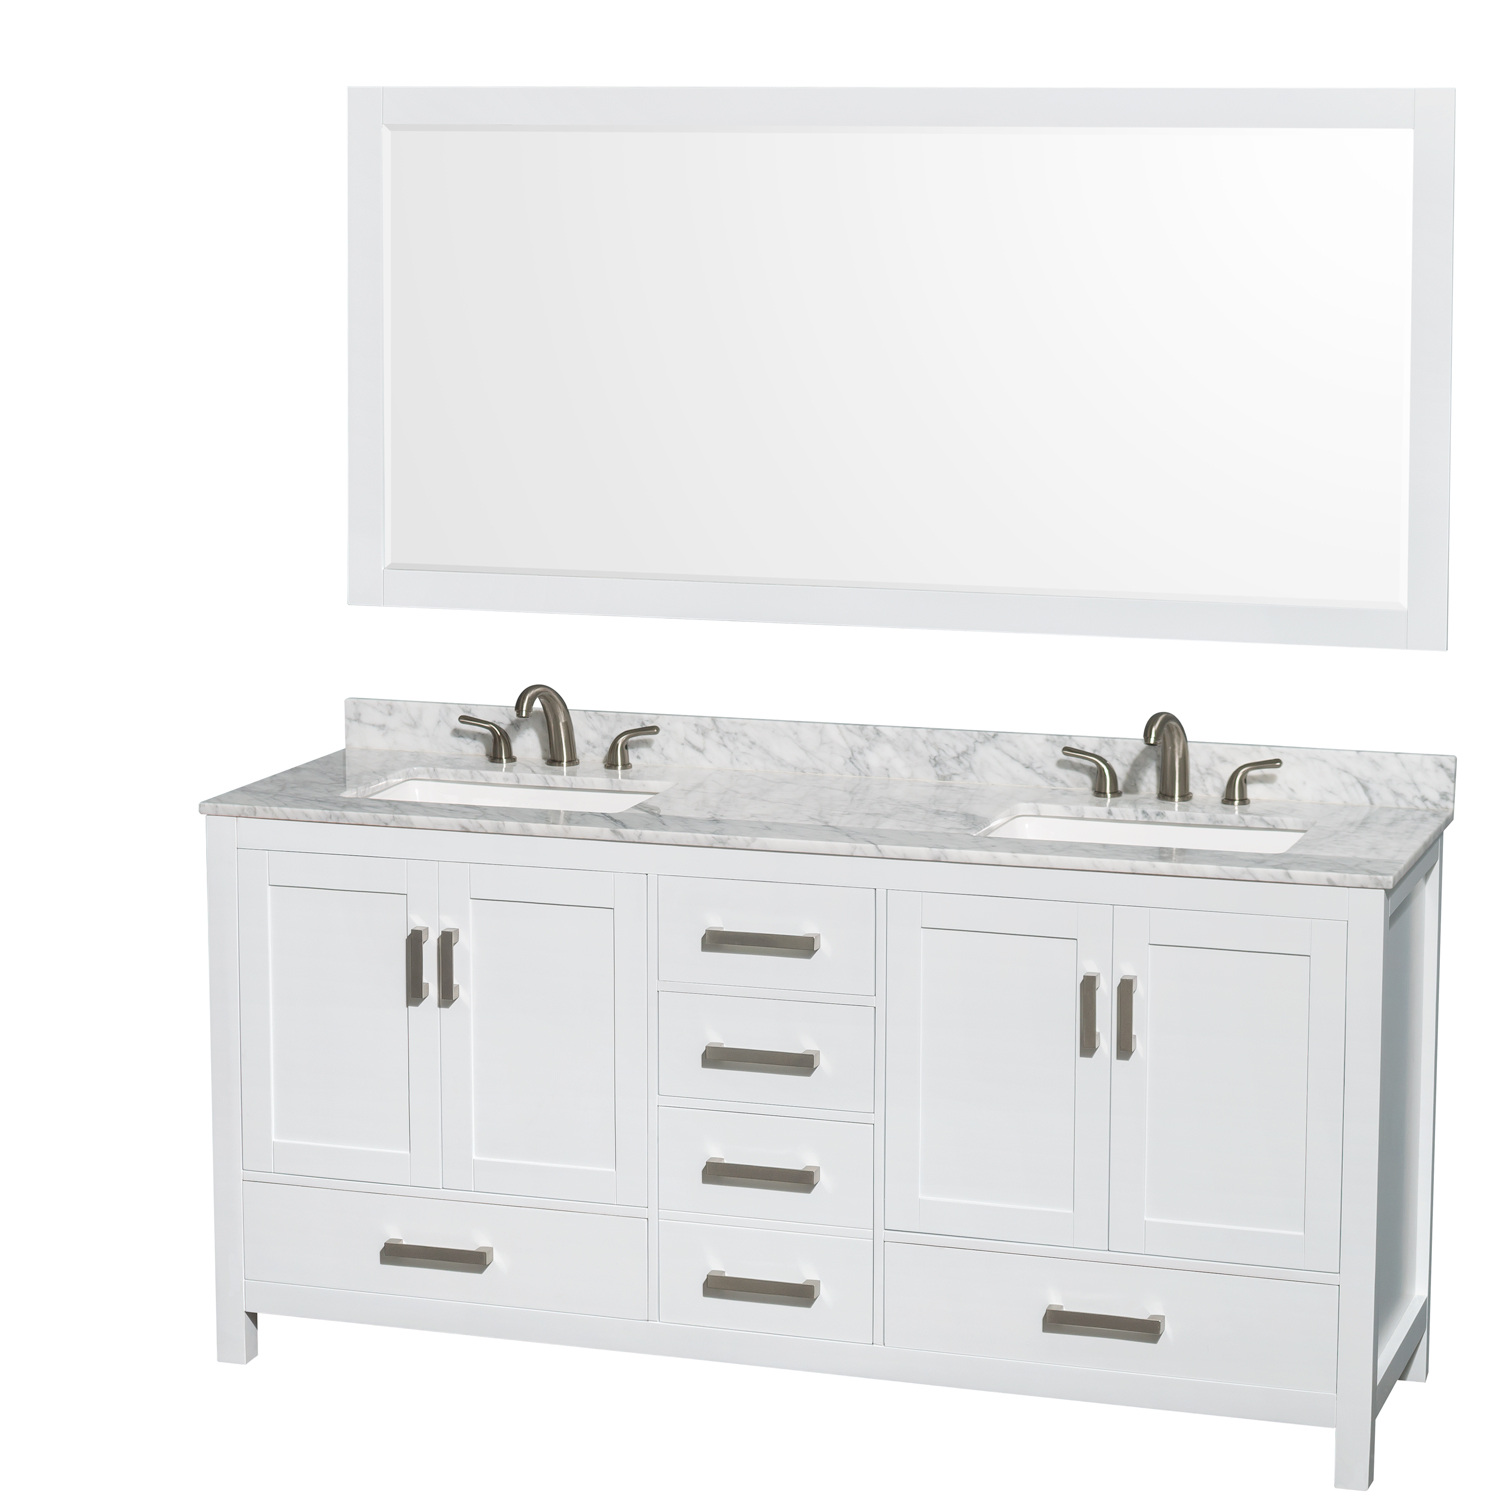 Sheffield 72 Double Bathroom Vanity Square Sinks 3 Hole White Beautiful Bathroom Furniture For Every Home Wyndham Collection